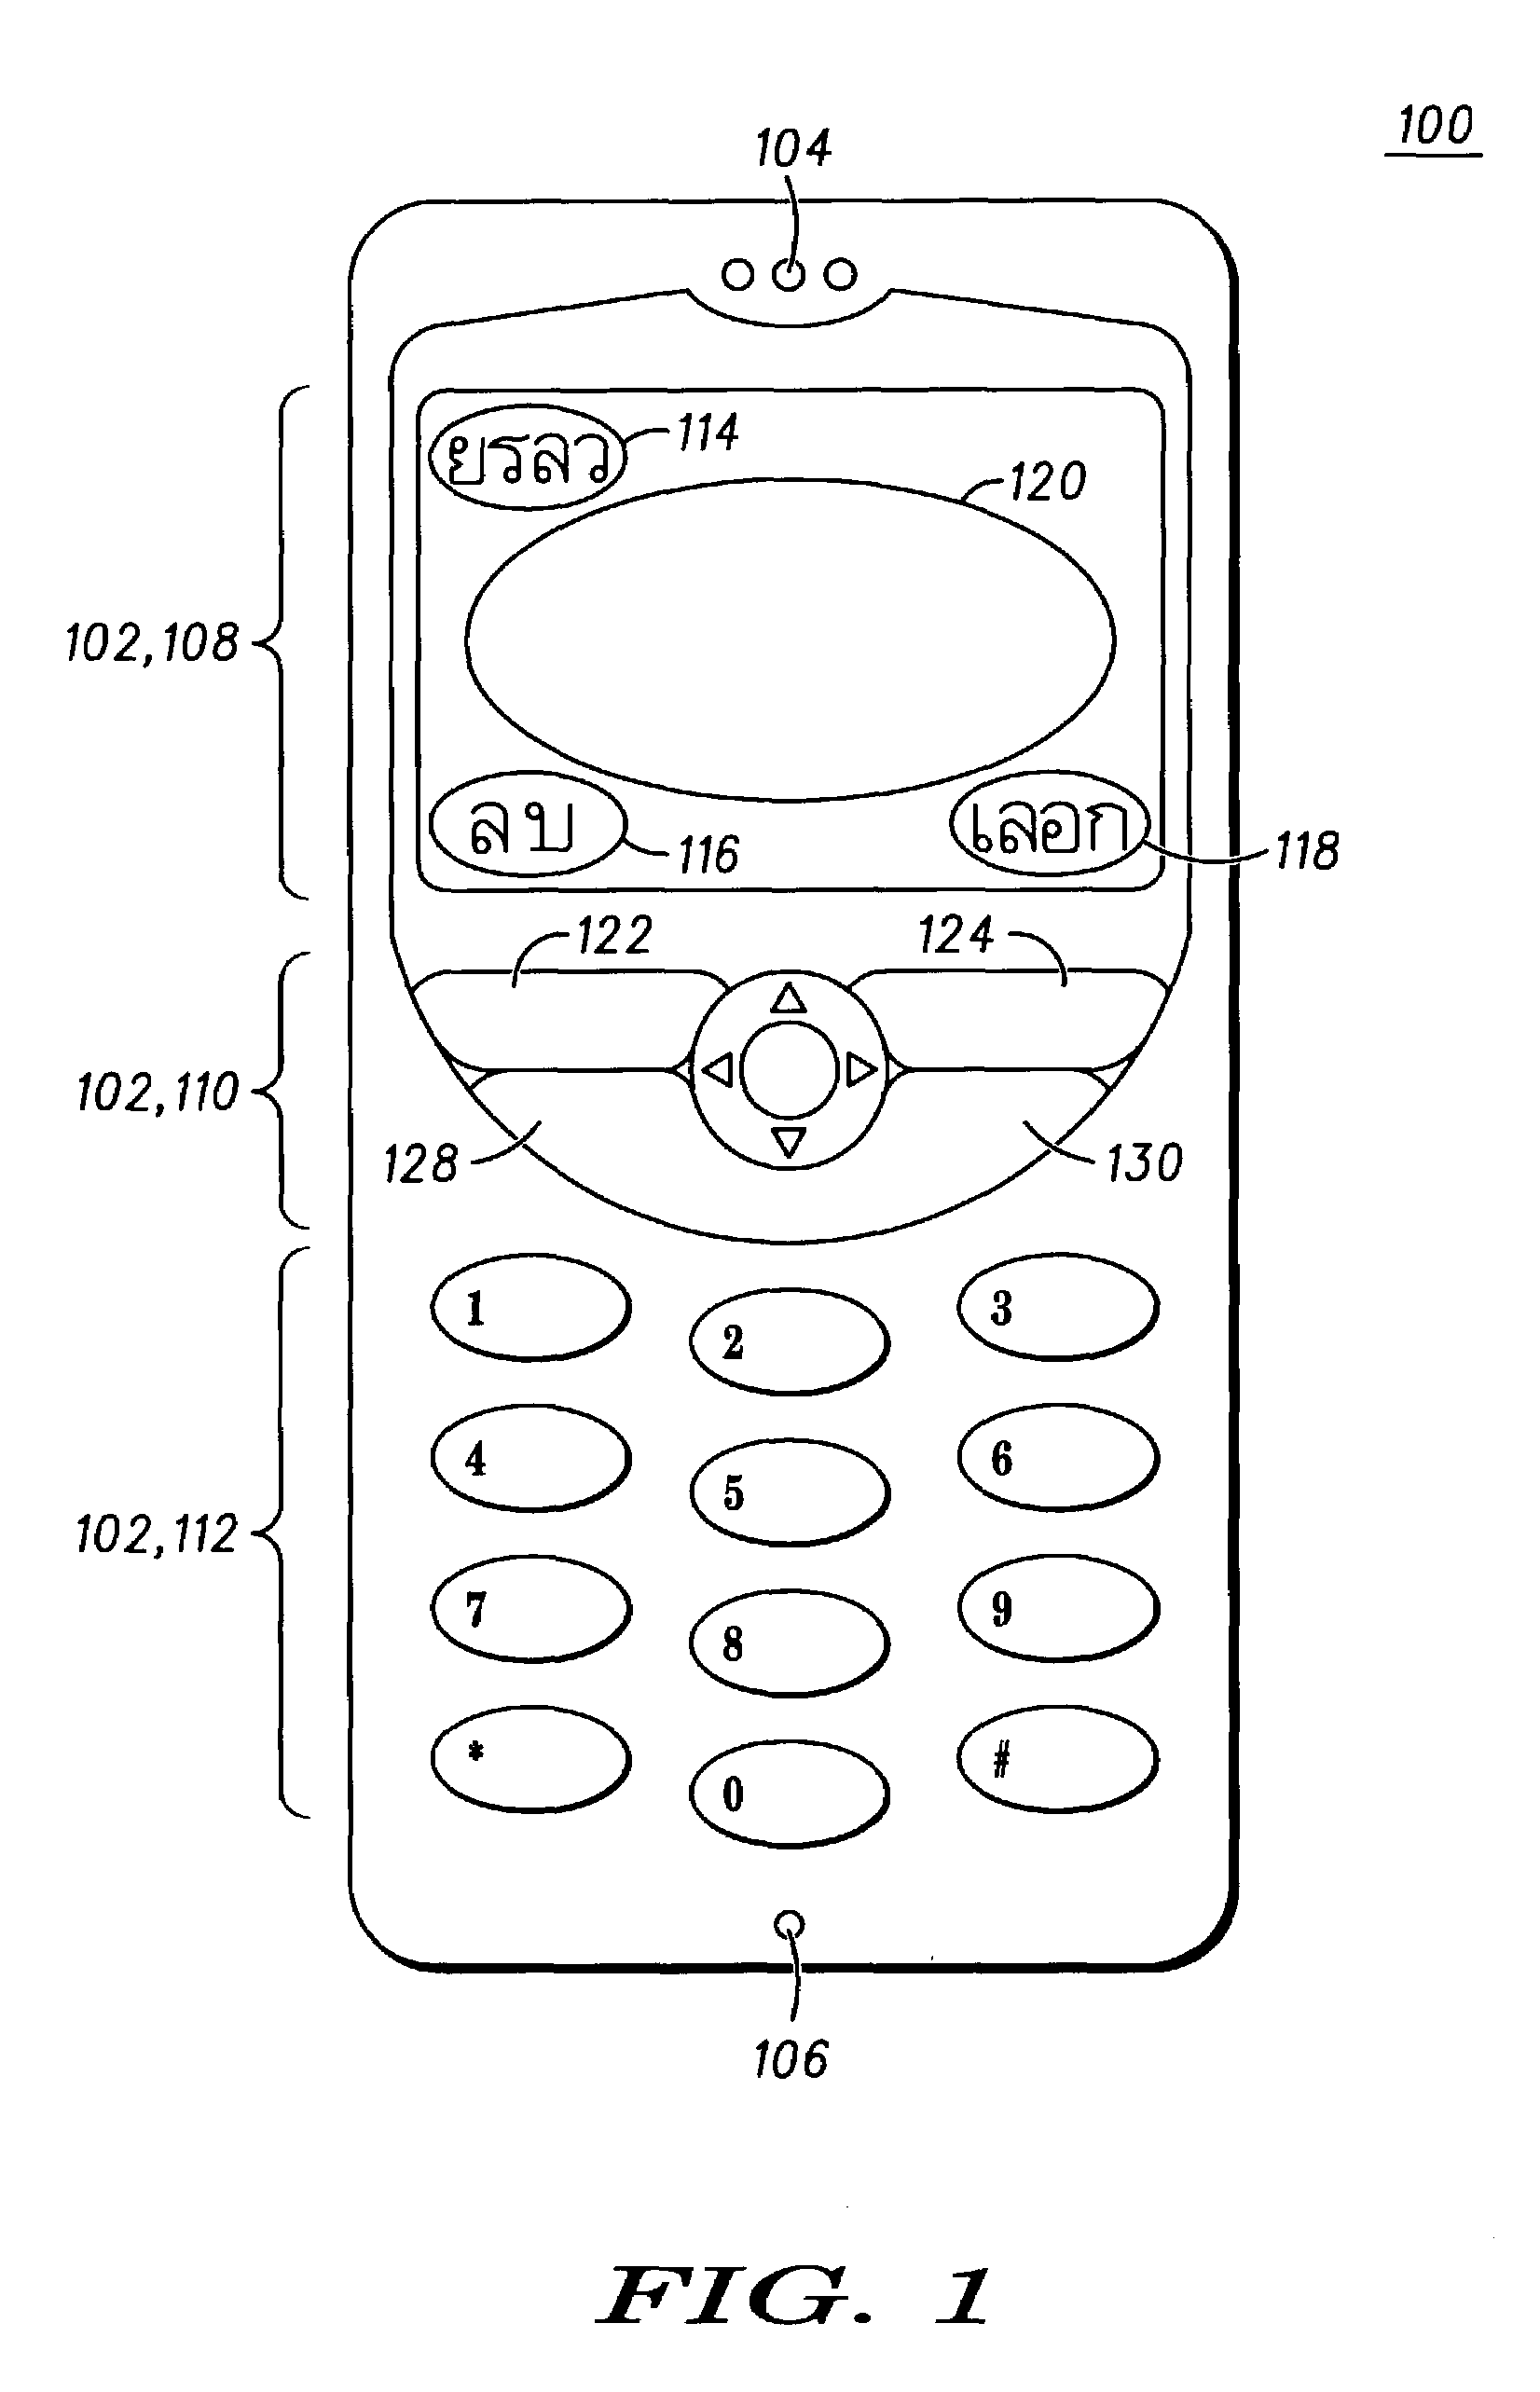 User interface of a keypad entry system for character input